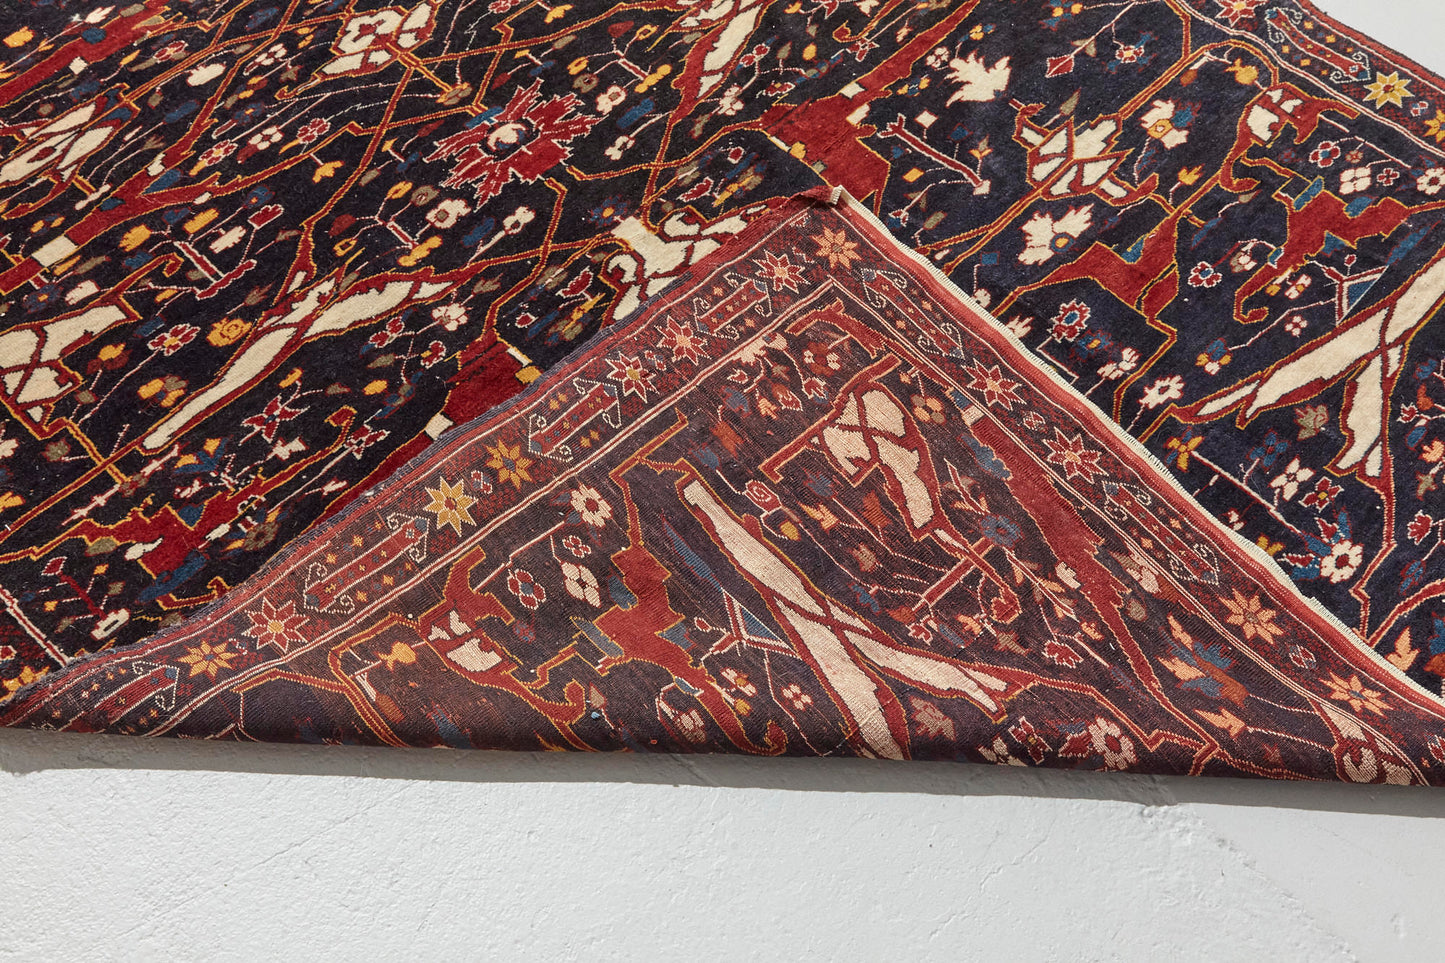 Front and back of Antique Bidjar Persian Rug Sampler, hand woven with dark blue base and red, cream, gold and lighter blue shapes, beautiful piece in excellent condition for a study, bedroom or foyer rug - Available from King Kennedy Rugs Los Angeles